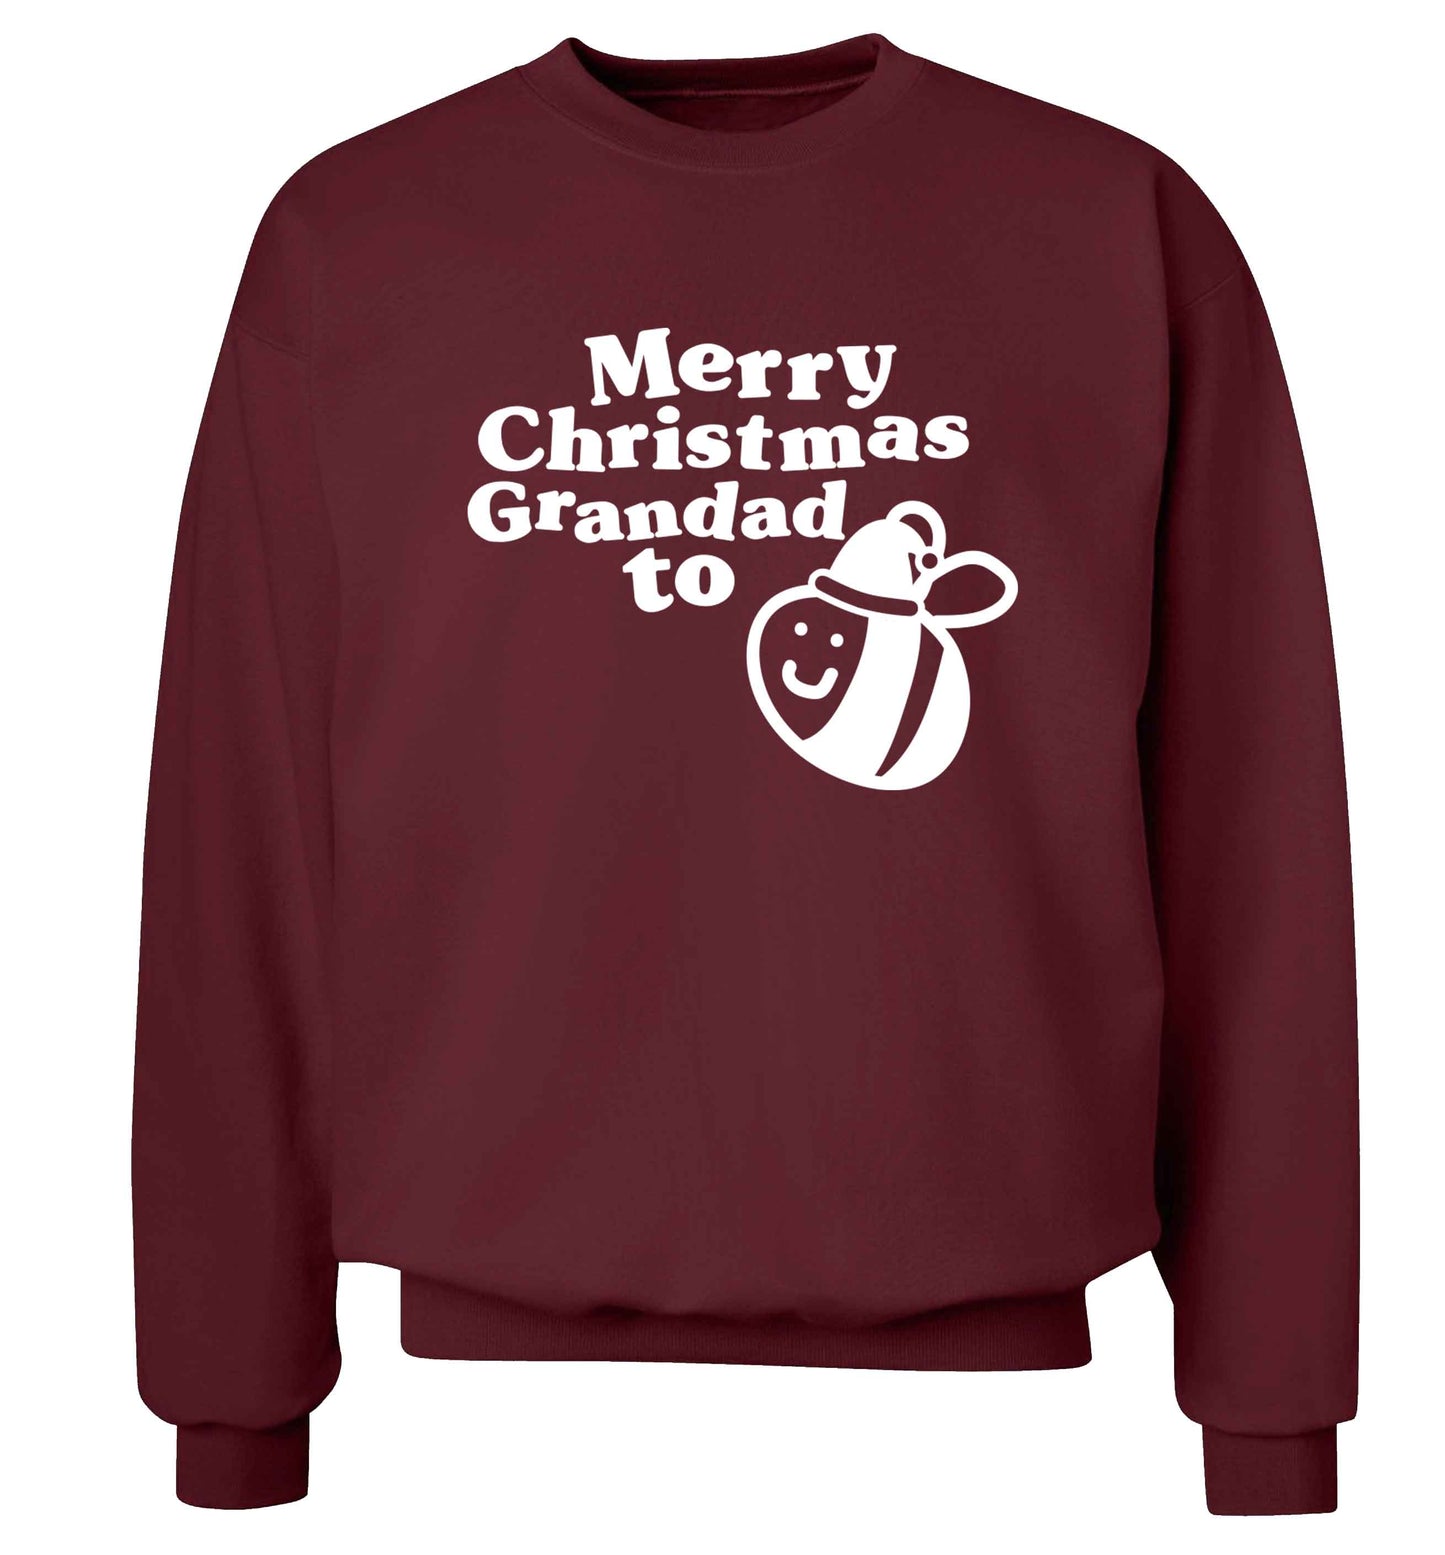 Merry Christmas grandad to be Adult's unisex maroon Sweater 2XL